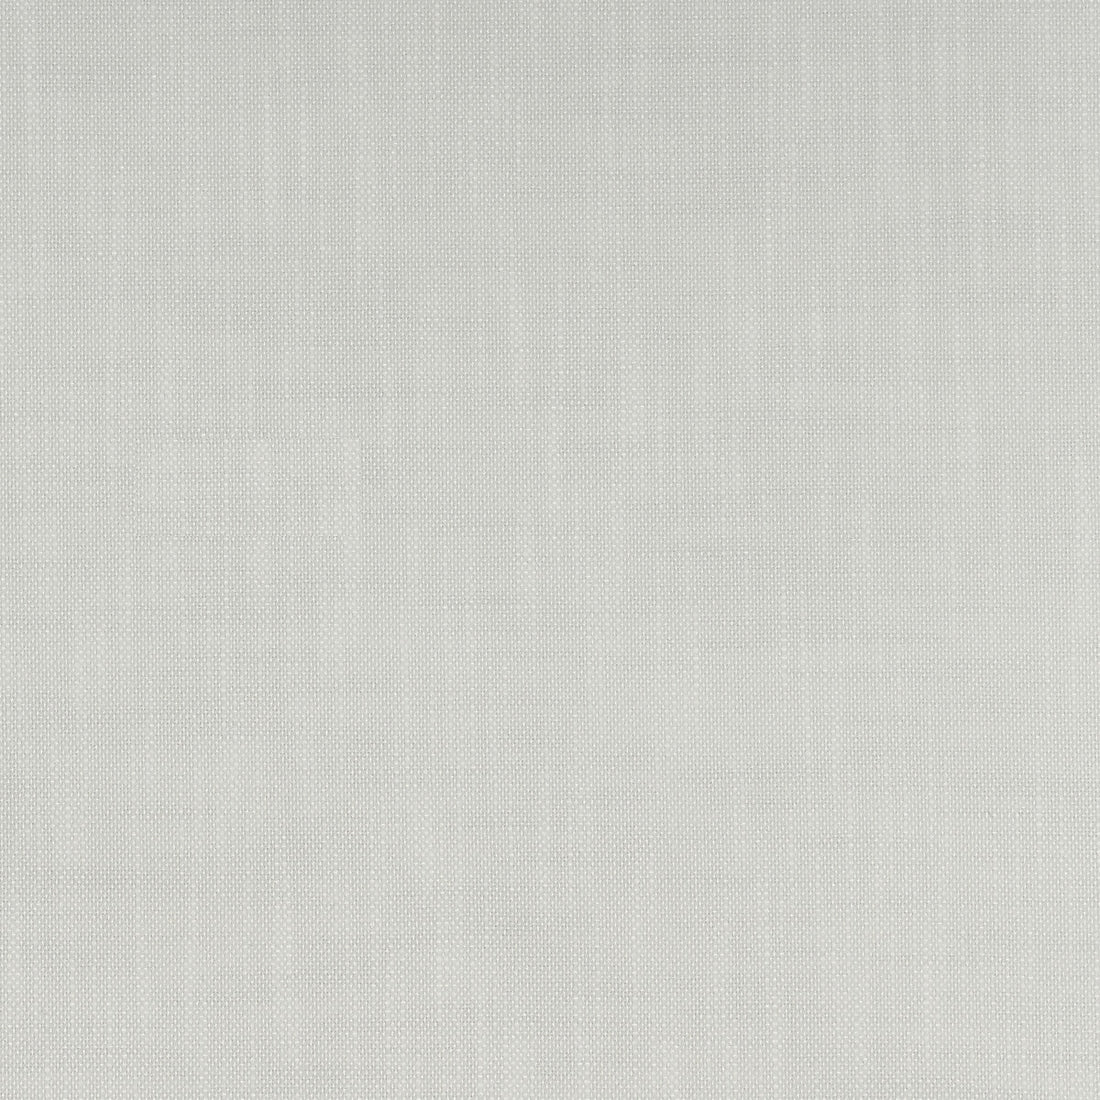 Kravet Smart fabric in 35517-1111 color - pattern 35517.1111.0 - by Kravet Smart in the Inside Out Performance Fabrics collection